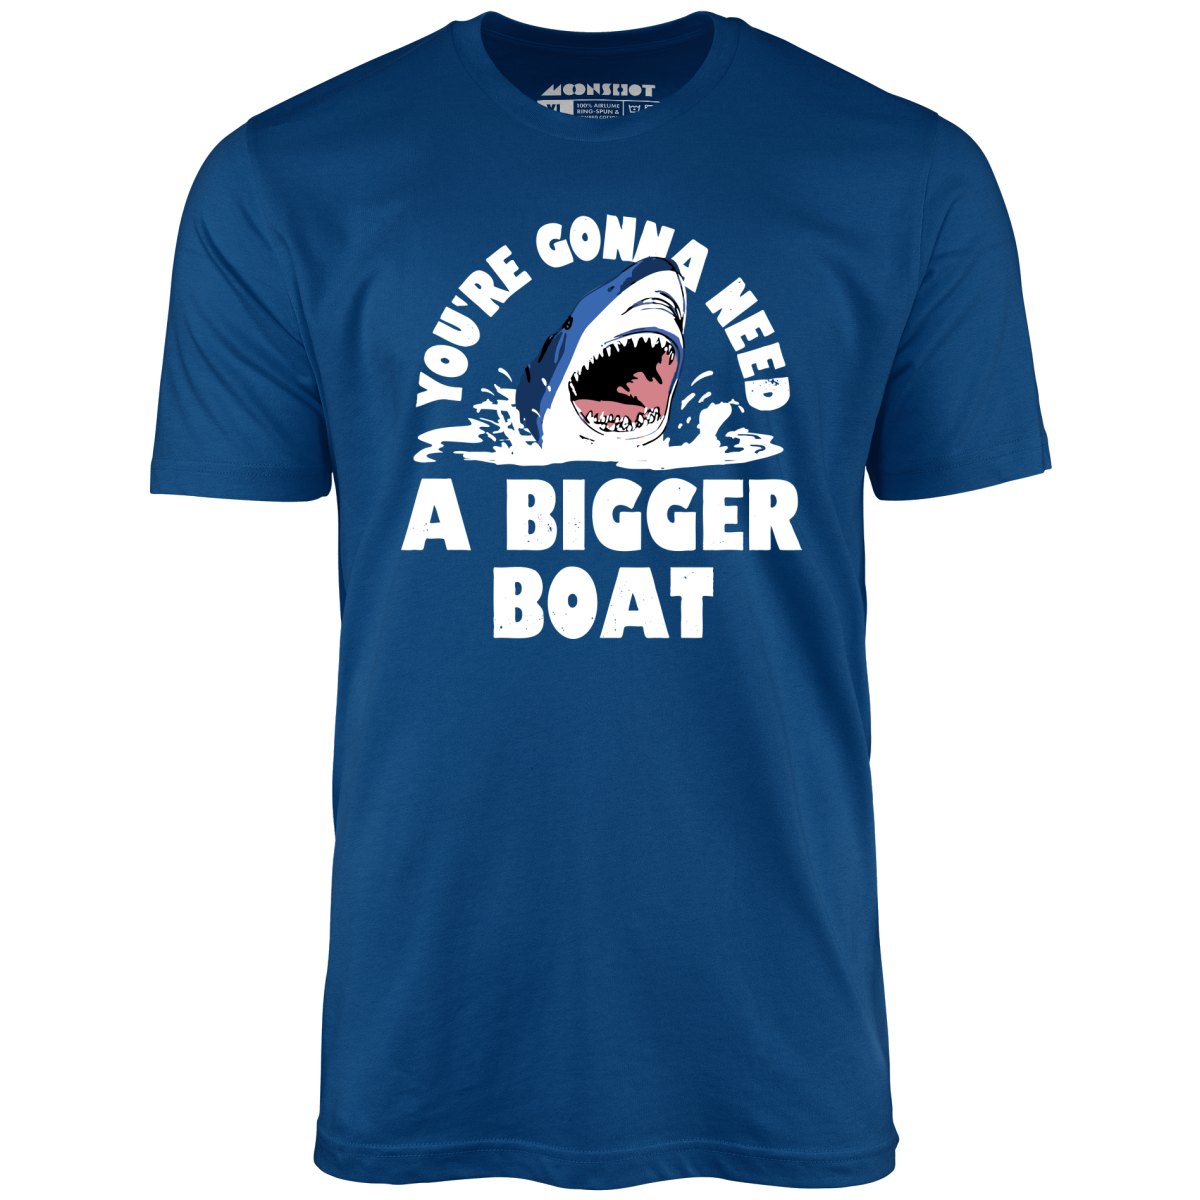 You're Gonna Need A Bigger boat - Unisex T-Shirt